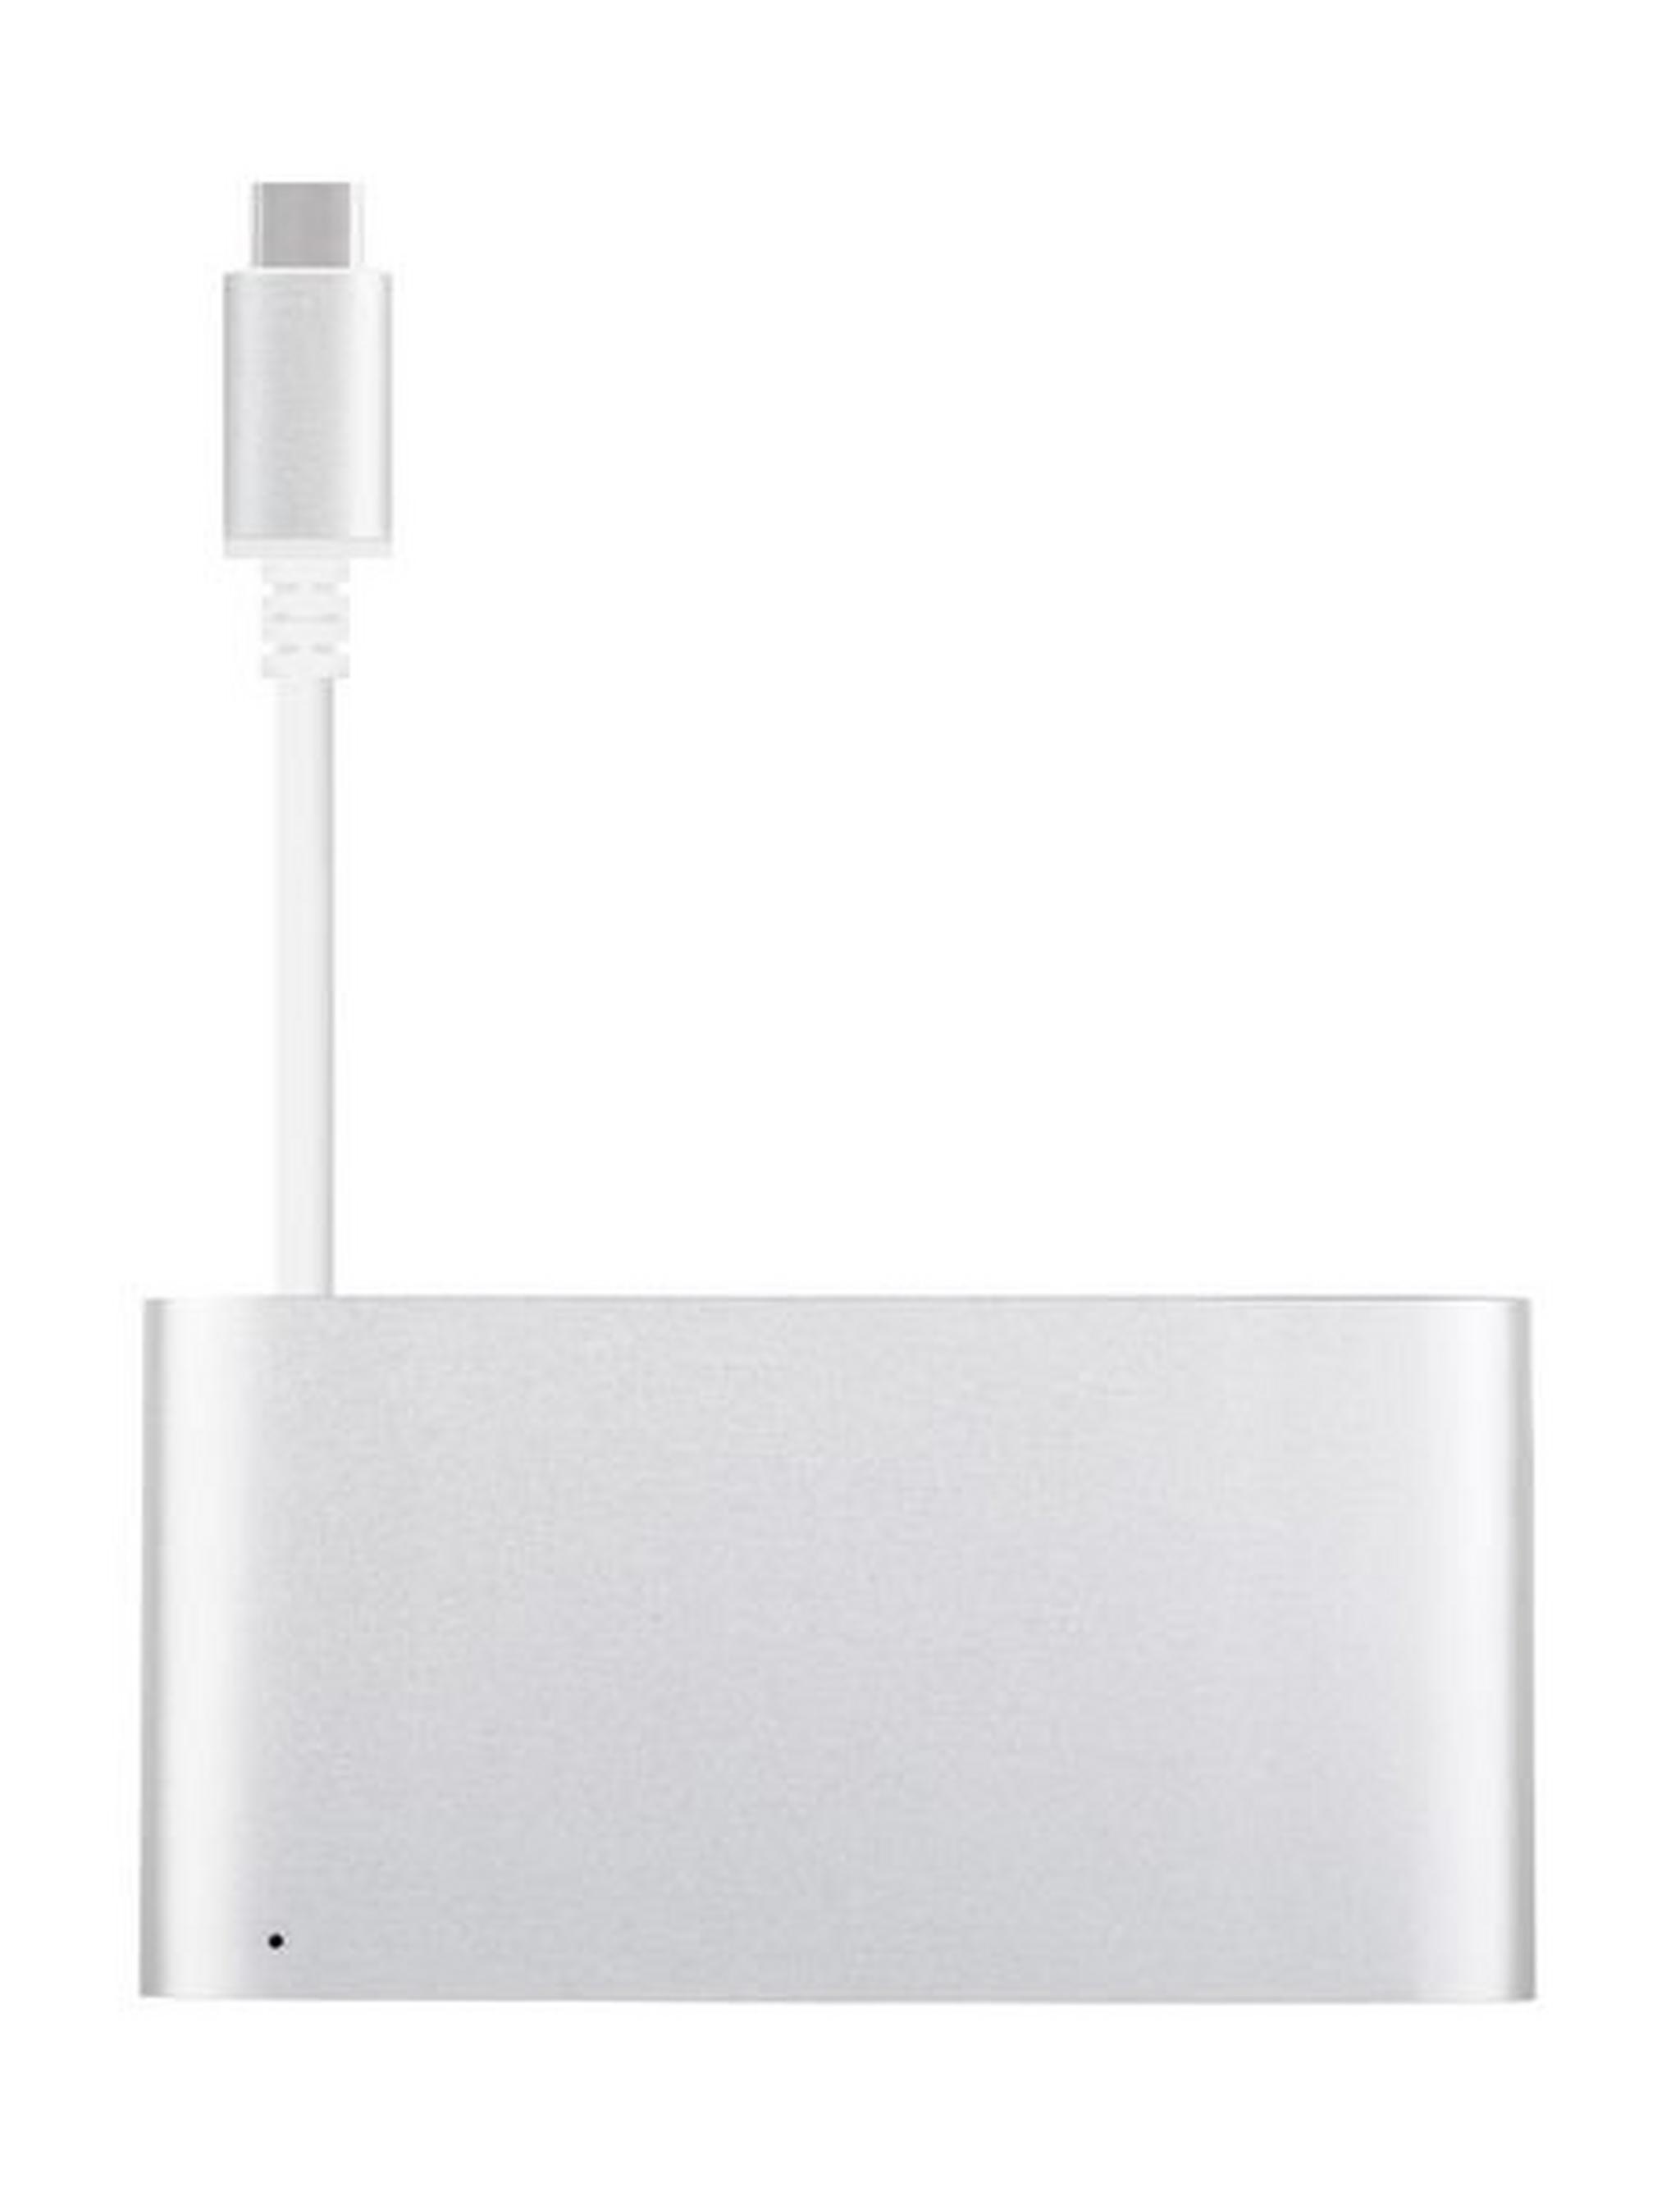 Moshi USB 3.0 Type-C Multiport Adapter – Silver